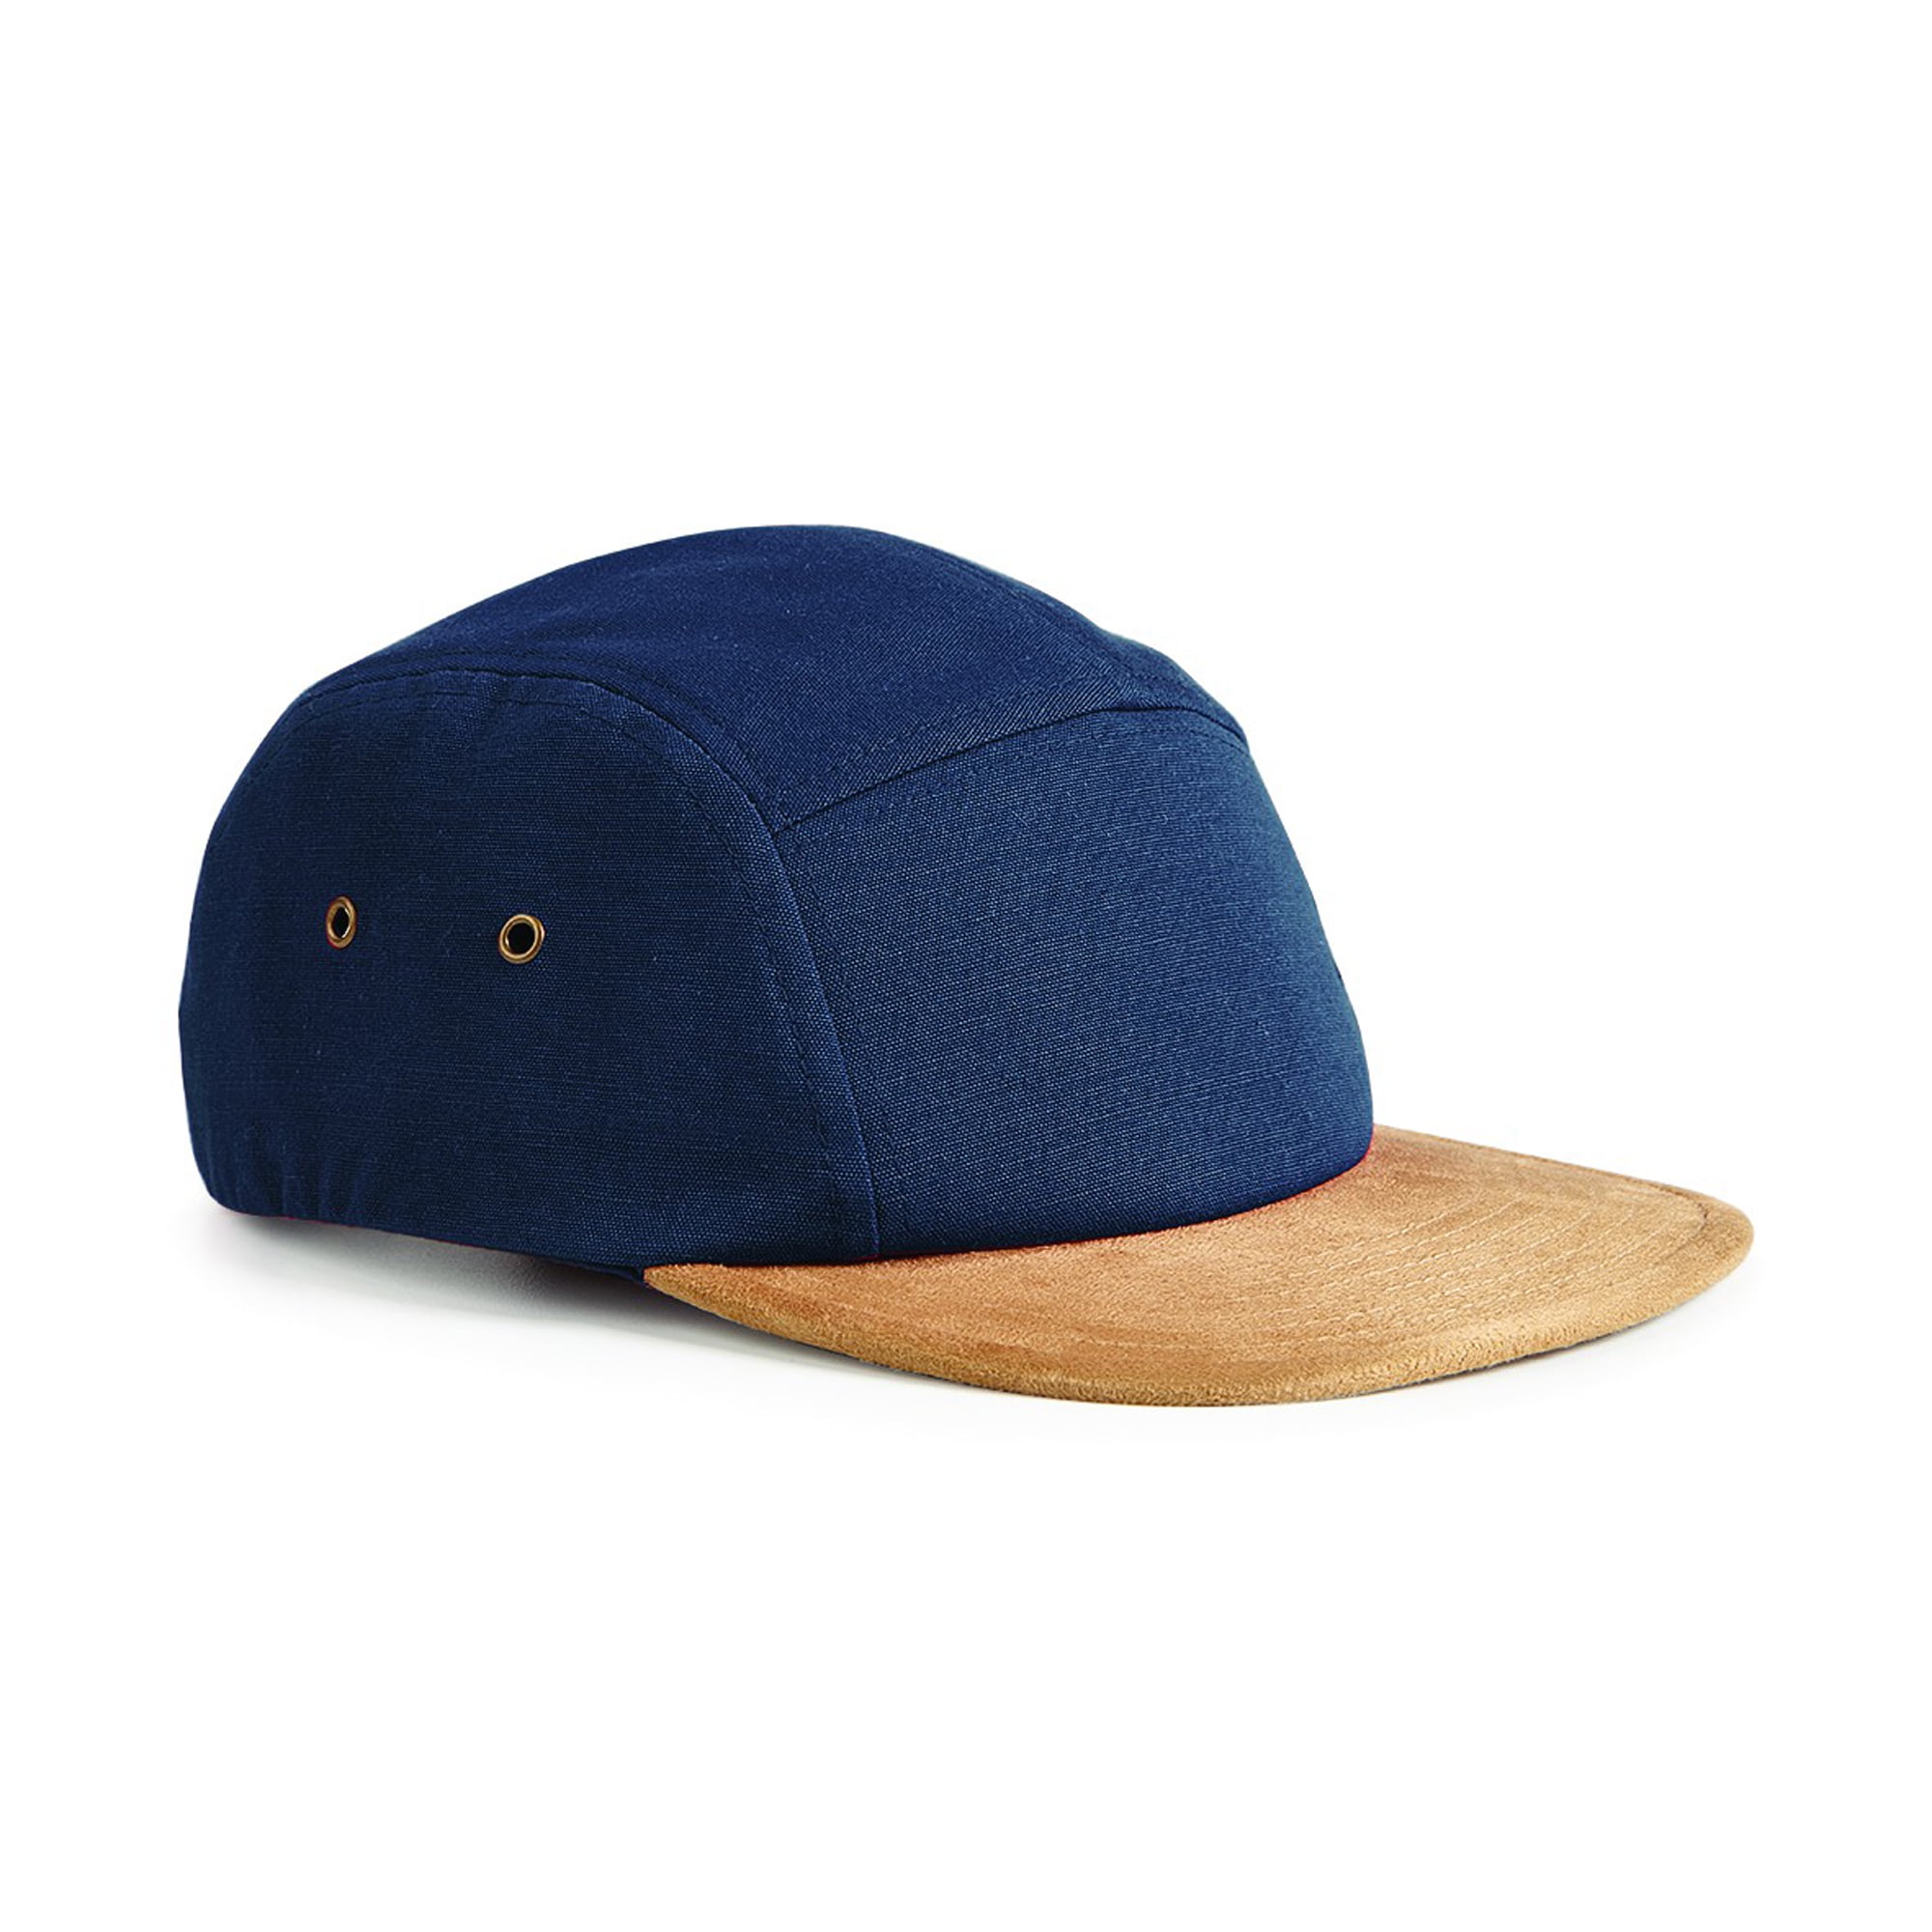 Beechfield Authentique Piped 5 Panel Cap Contraste deux tons Baseball Hat 